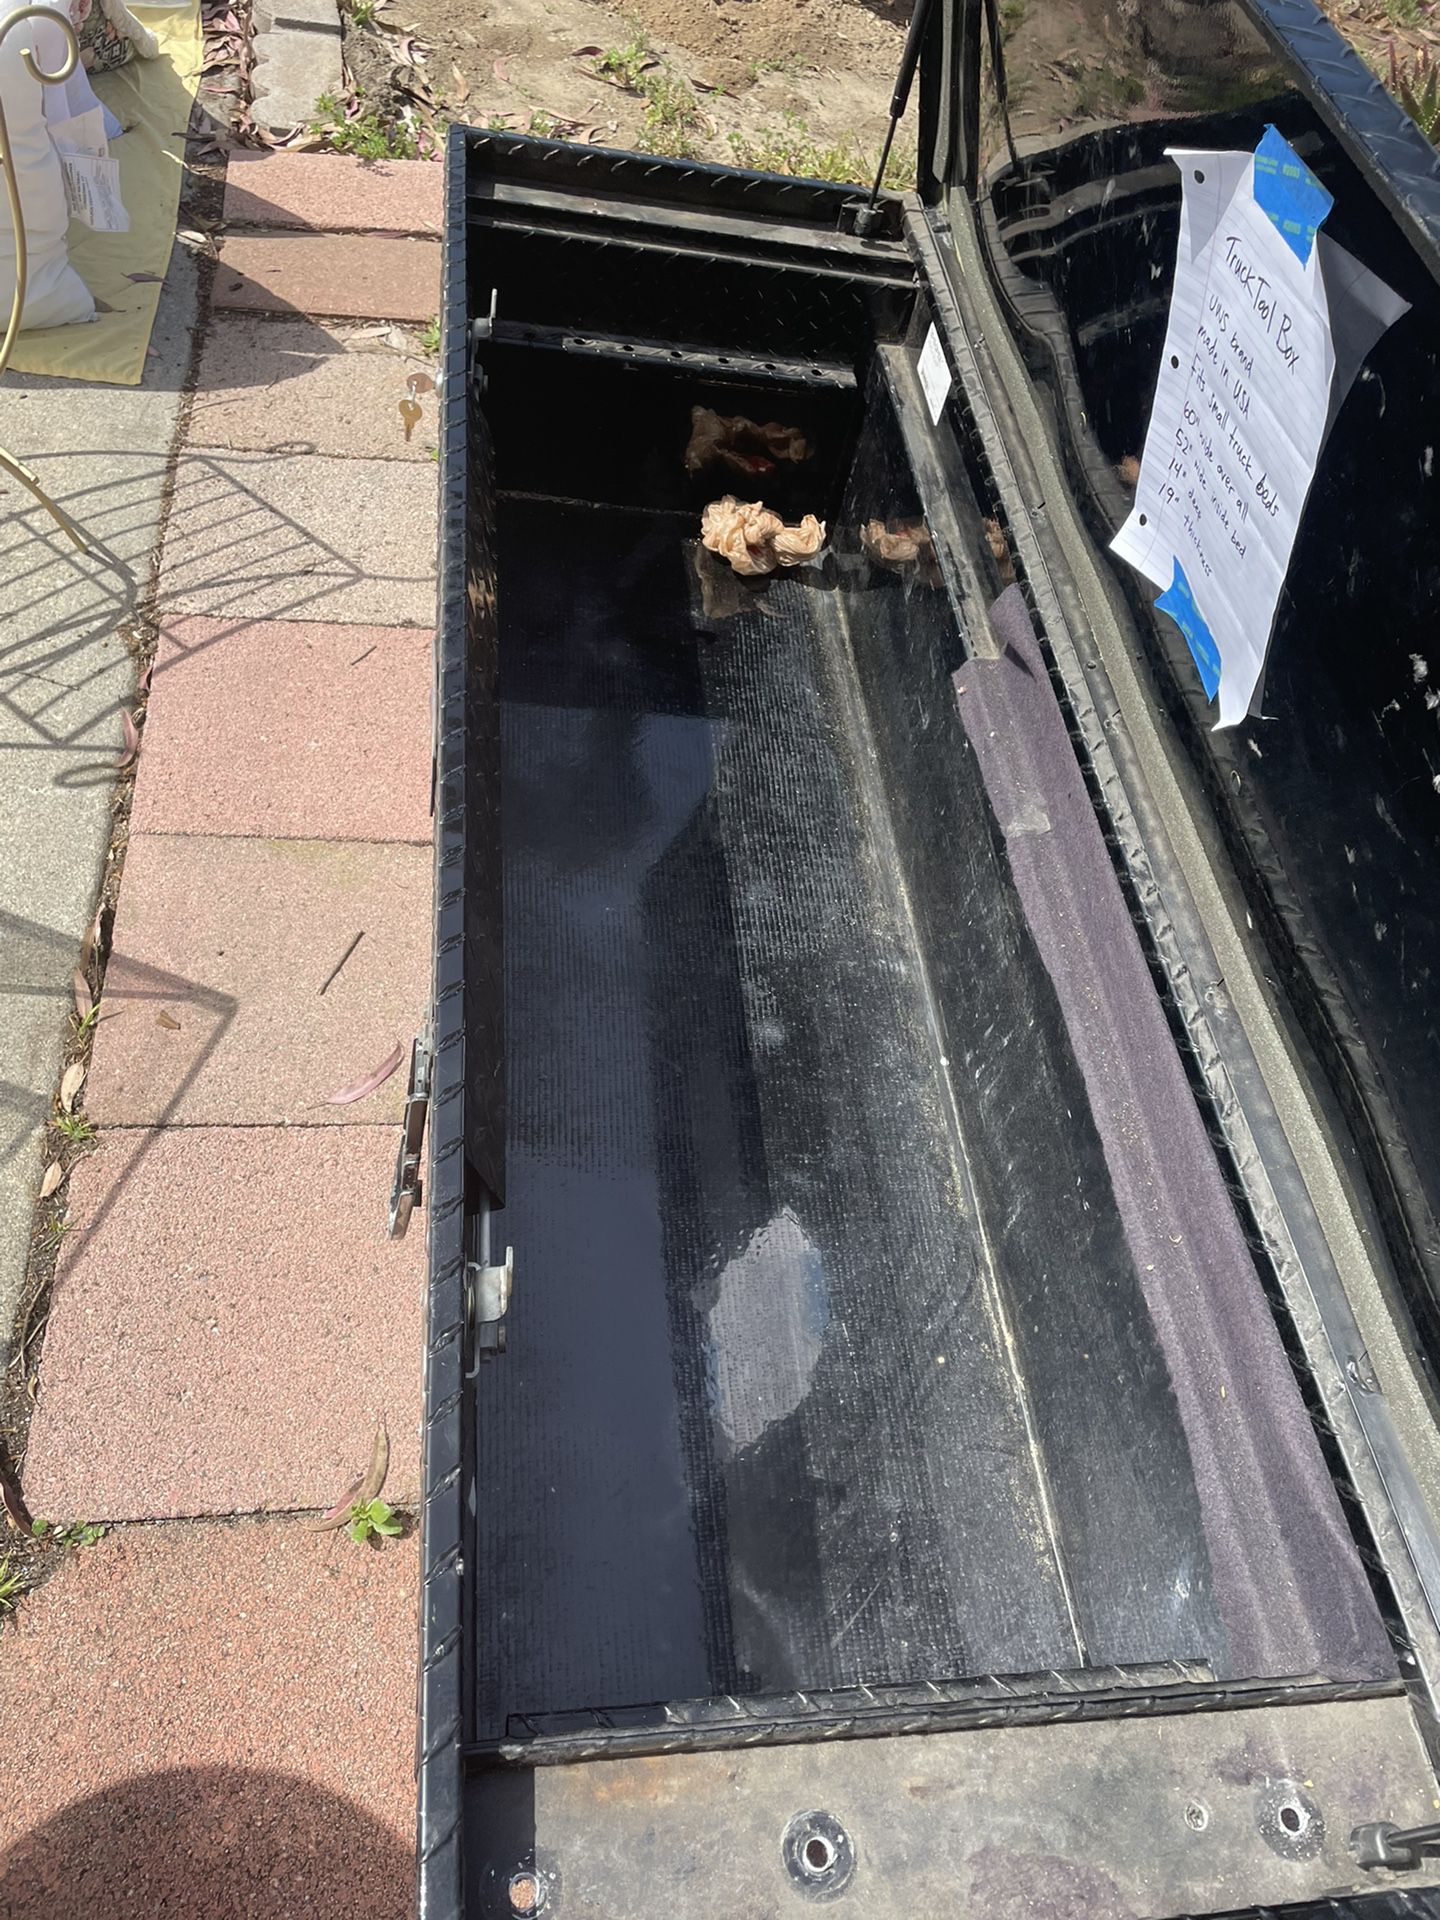 Locking Tool Box For Smaller Truck for Sale in San Diego, CA - OfferUp